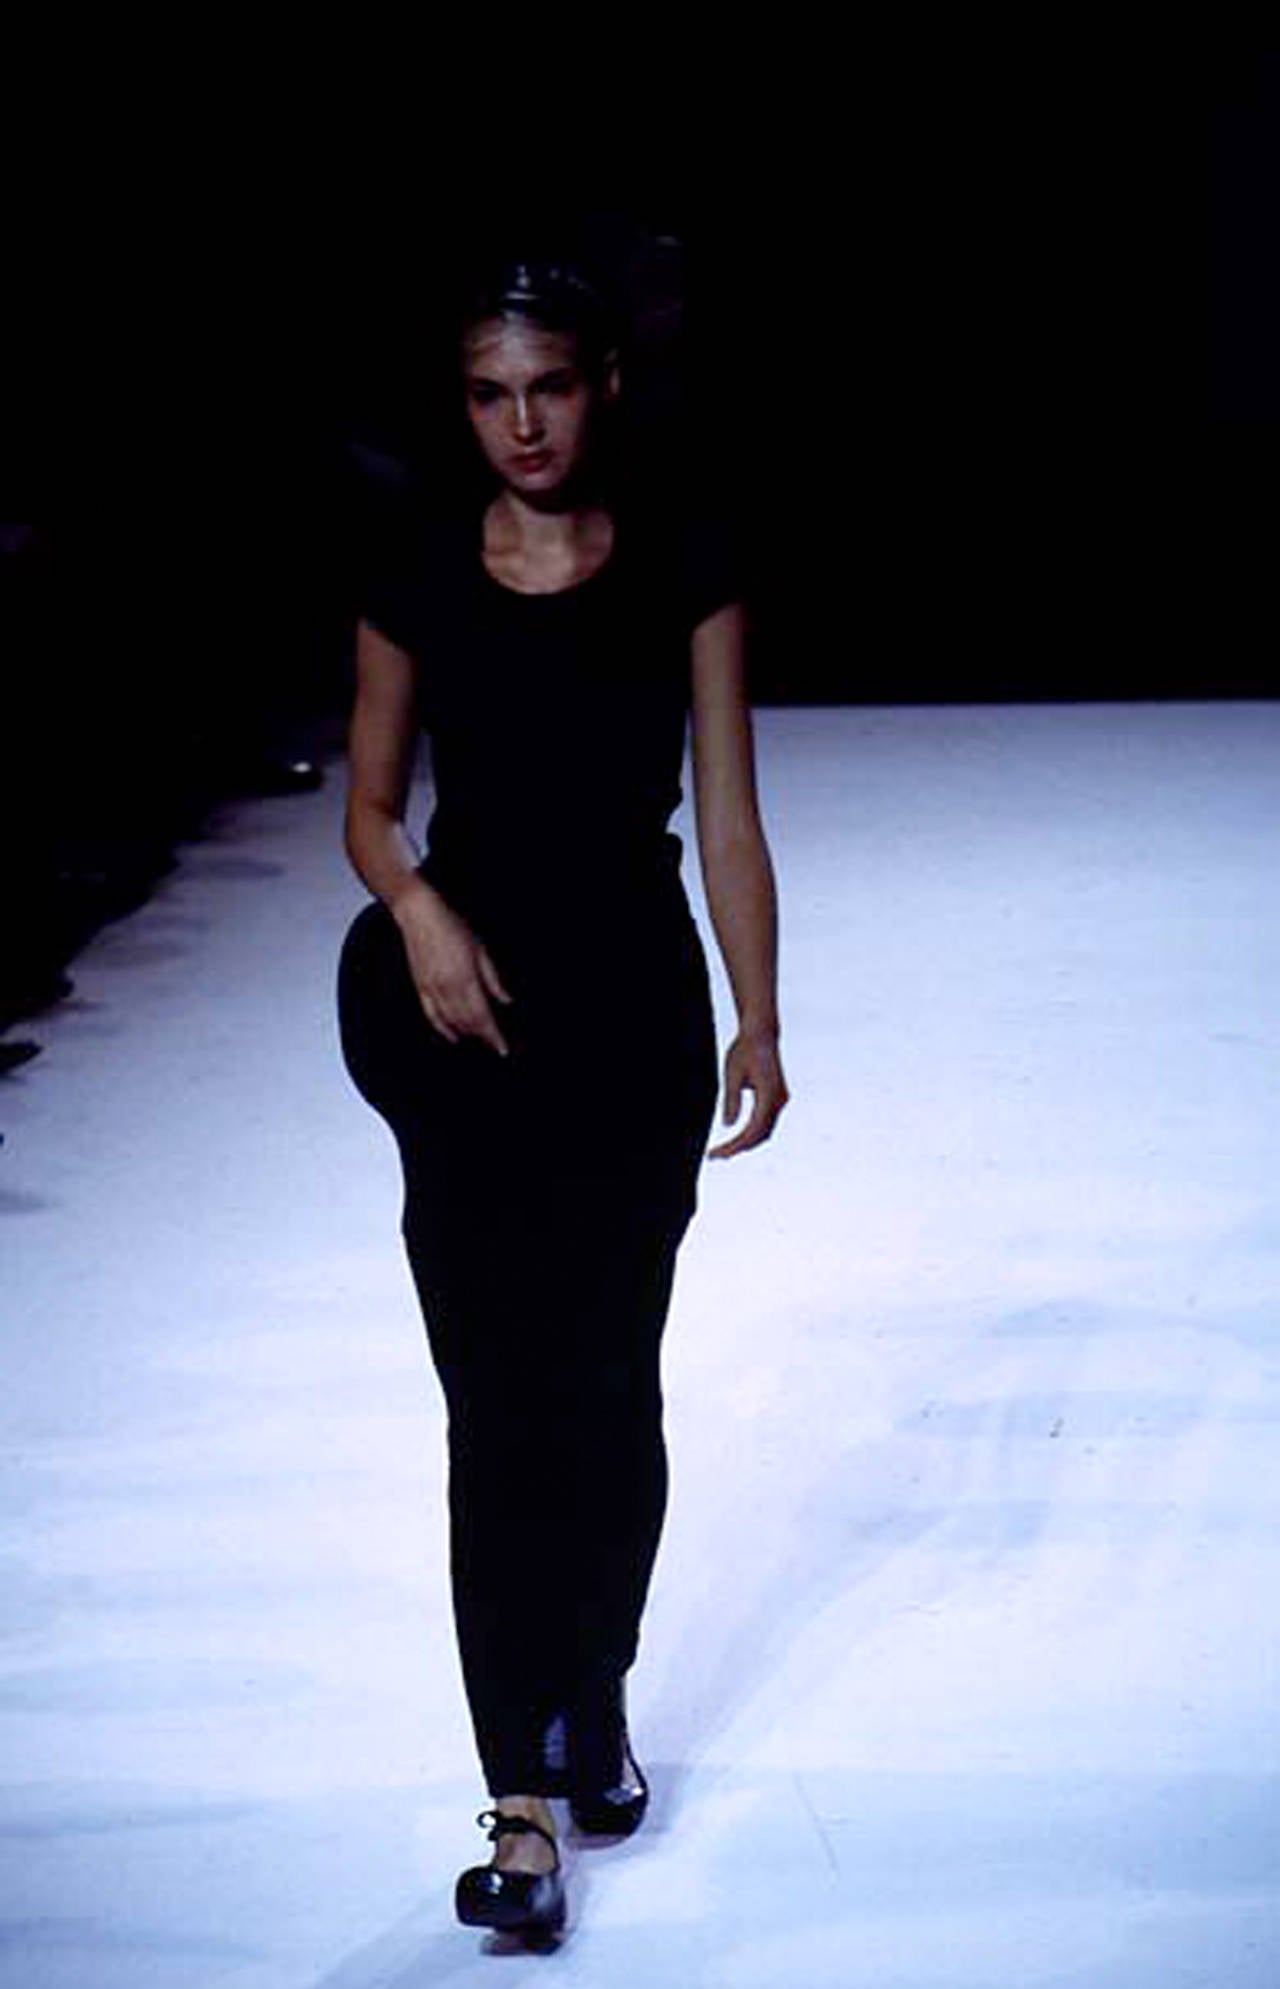 A fine and rare COMME des GARCONS 'bump' dress from the highly sought after Body Meets Dress/Bumps Spring/Summer 1997 runway collection. Rei Kawakubo stated 'the body becomes dress, dress becomes body'. She played with the interaction between the